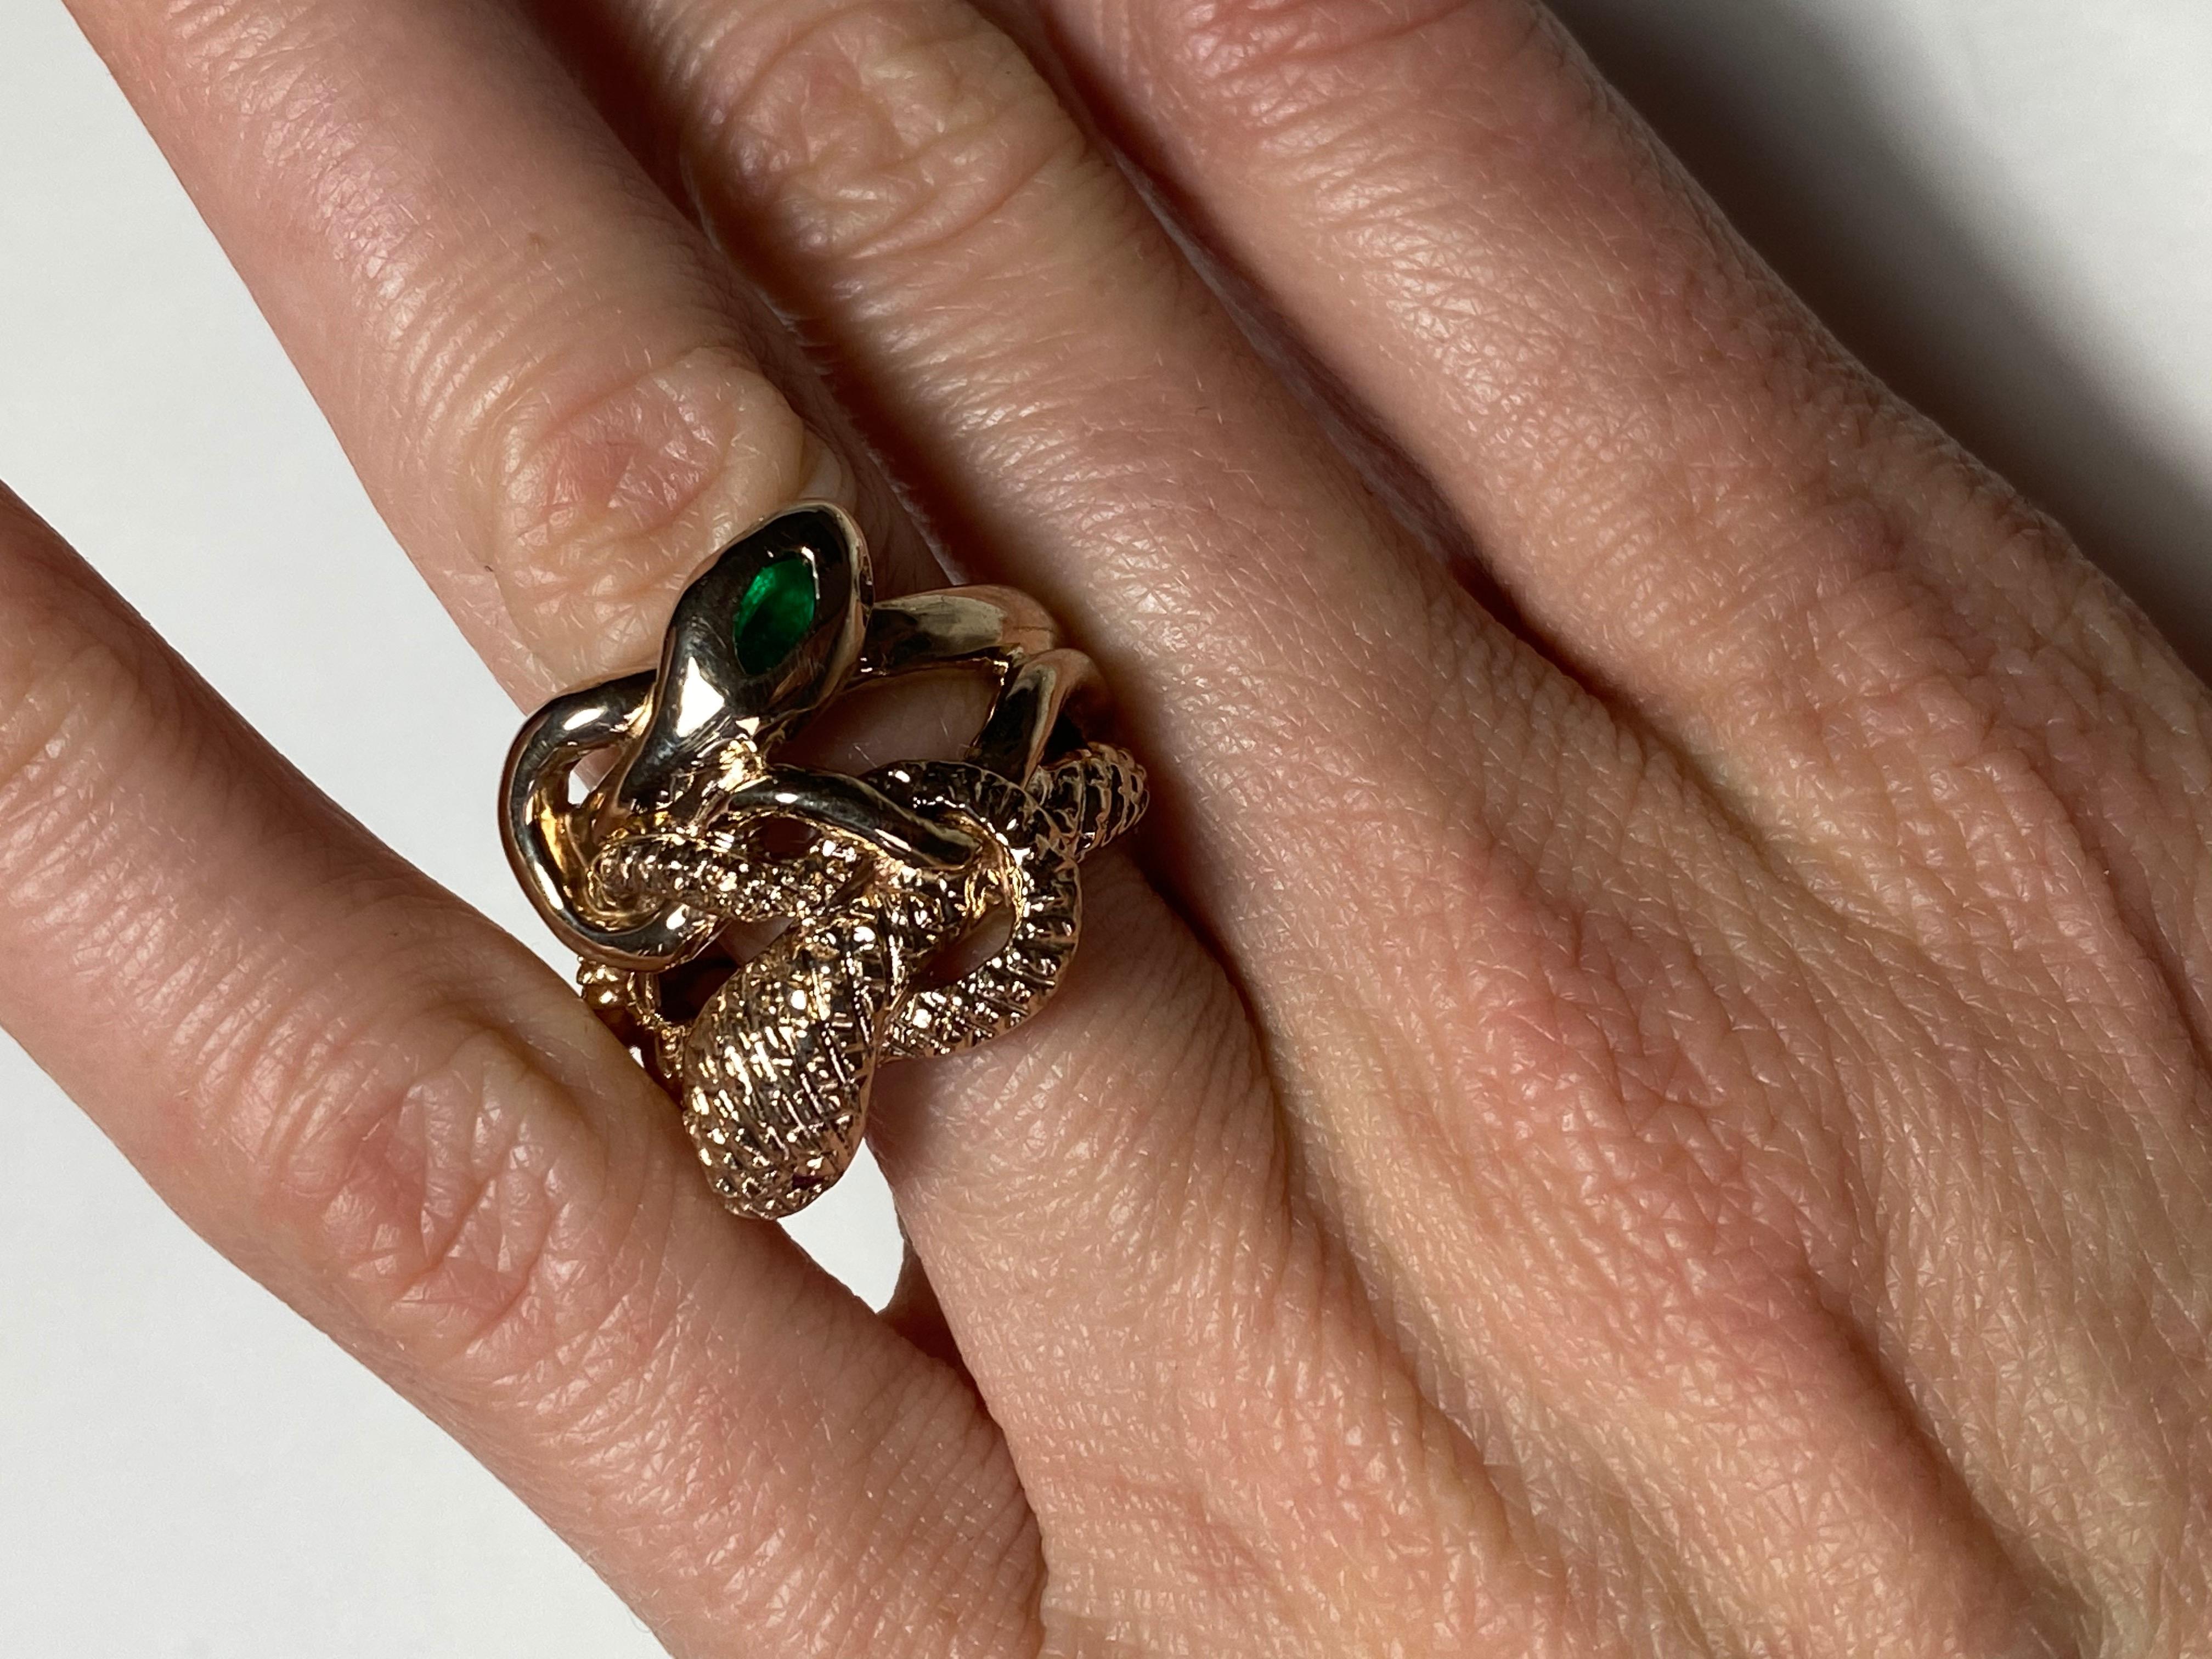 Snake Ring 14k Solid Gold Emerald White Diamond Ruby Victorian Style J Dauphin

J DAUPHIN 